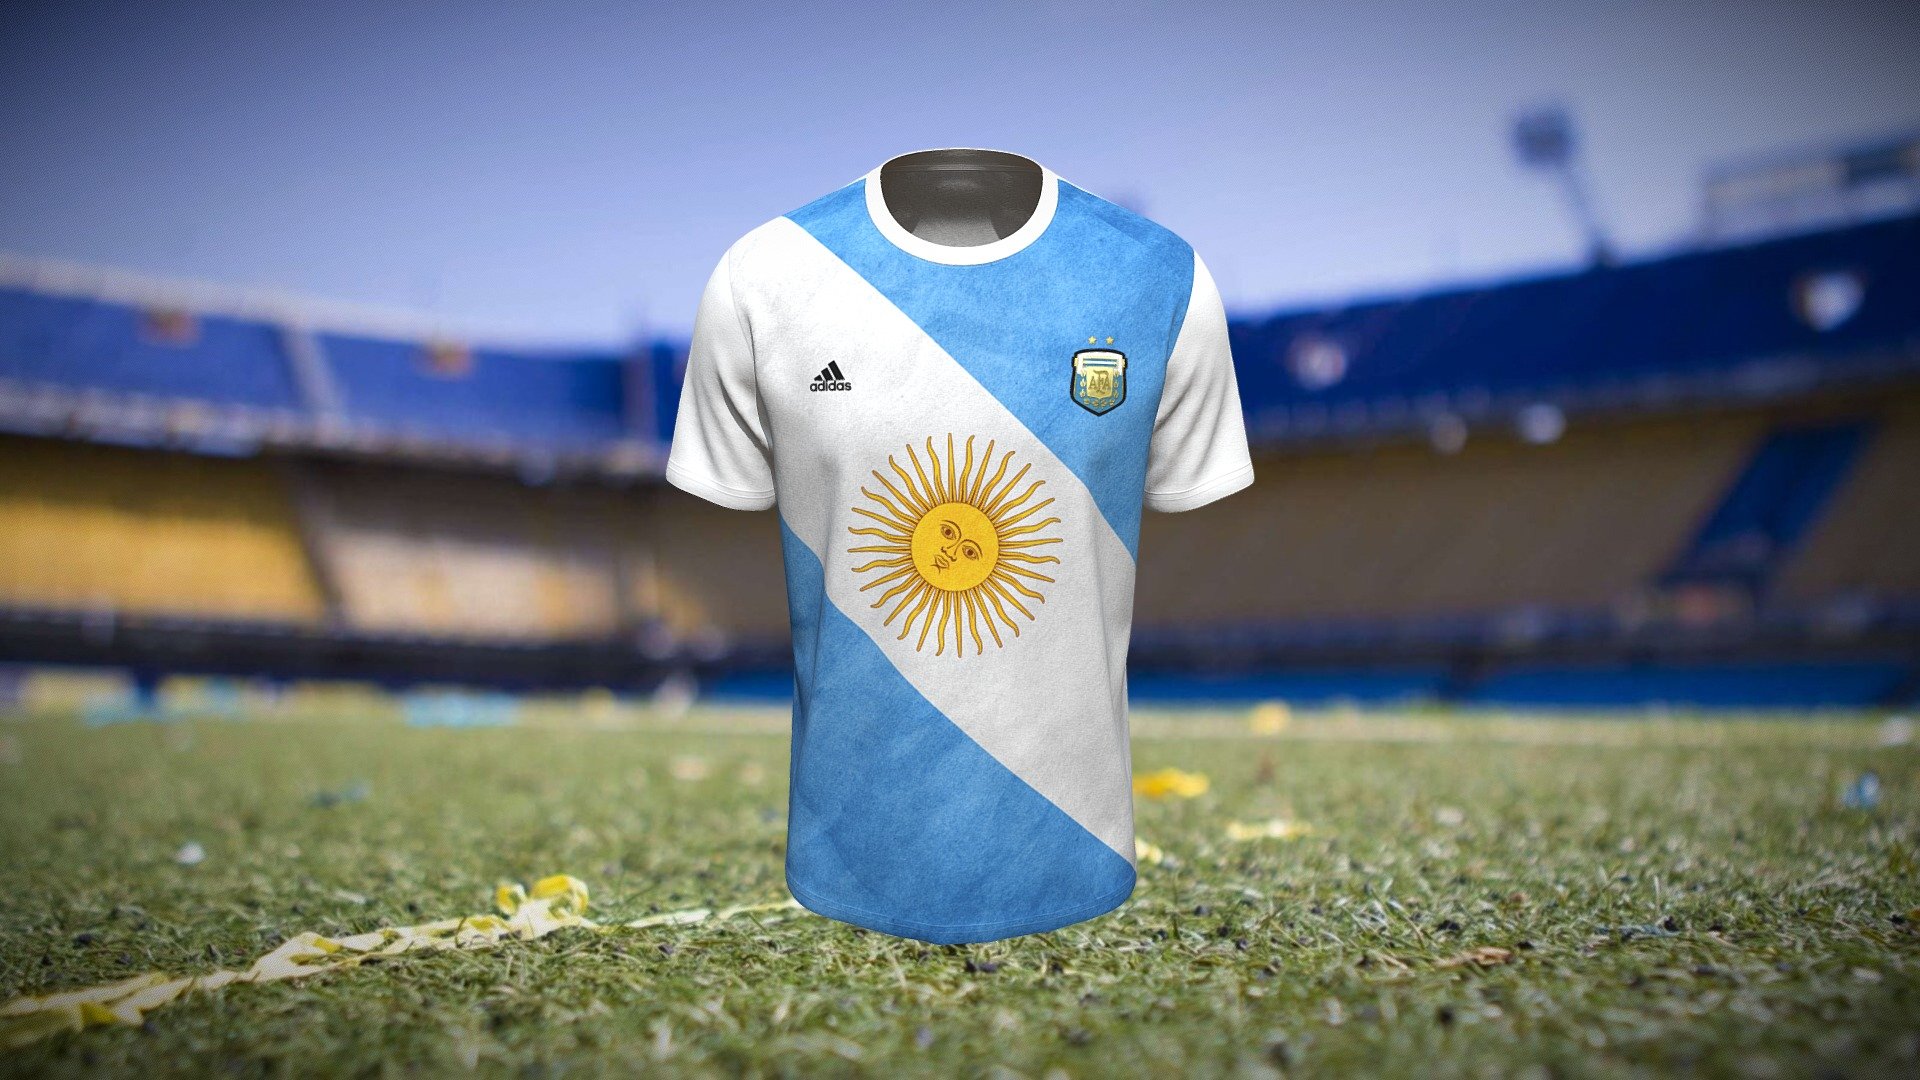 Cloth Title = Men's Replica adidas Argentina Jersey

SKU = DG100044 

Category = Unisex 

Product Type = T-Shirt 

Cloth Length = Regular 

Body Fit = Loose Fit 

Occasion = Casual  

Sleeve Style = Set In Sleeve


Our Services:

3D Apparel Design.

OBJ,FBX,GLTF Making with High/Low Poly.

Fabric Digitalization.

Mockup making.

3D Teck Pack.

Pattern Making.

2D Illustration.

Cloth Animation and 360 Spin Video.


Contact us:- 

Email: info@digitalfashionwear.com 

Website: https://digitalfashionwear.com 


We designed all the types of cloth specially focused on product visualization, e-commerce, fitting, and production. 

We will design: 

T-shirts 

Polo shirts 

Hoodies 

Sweatshirt 

Jackets 

Shirts 

TankTops 

Trousers 

Bras 

Underwear 

Blazer 

Aprons 

Leggings 

and All Fashion items. 





Our goal is to make sure what we provide you, meets your demand 3d model